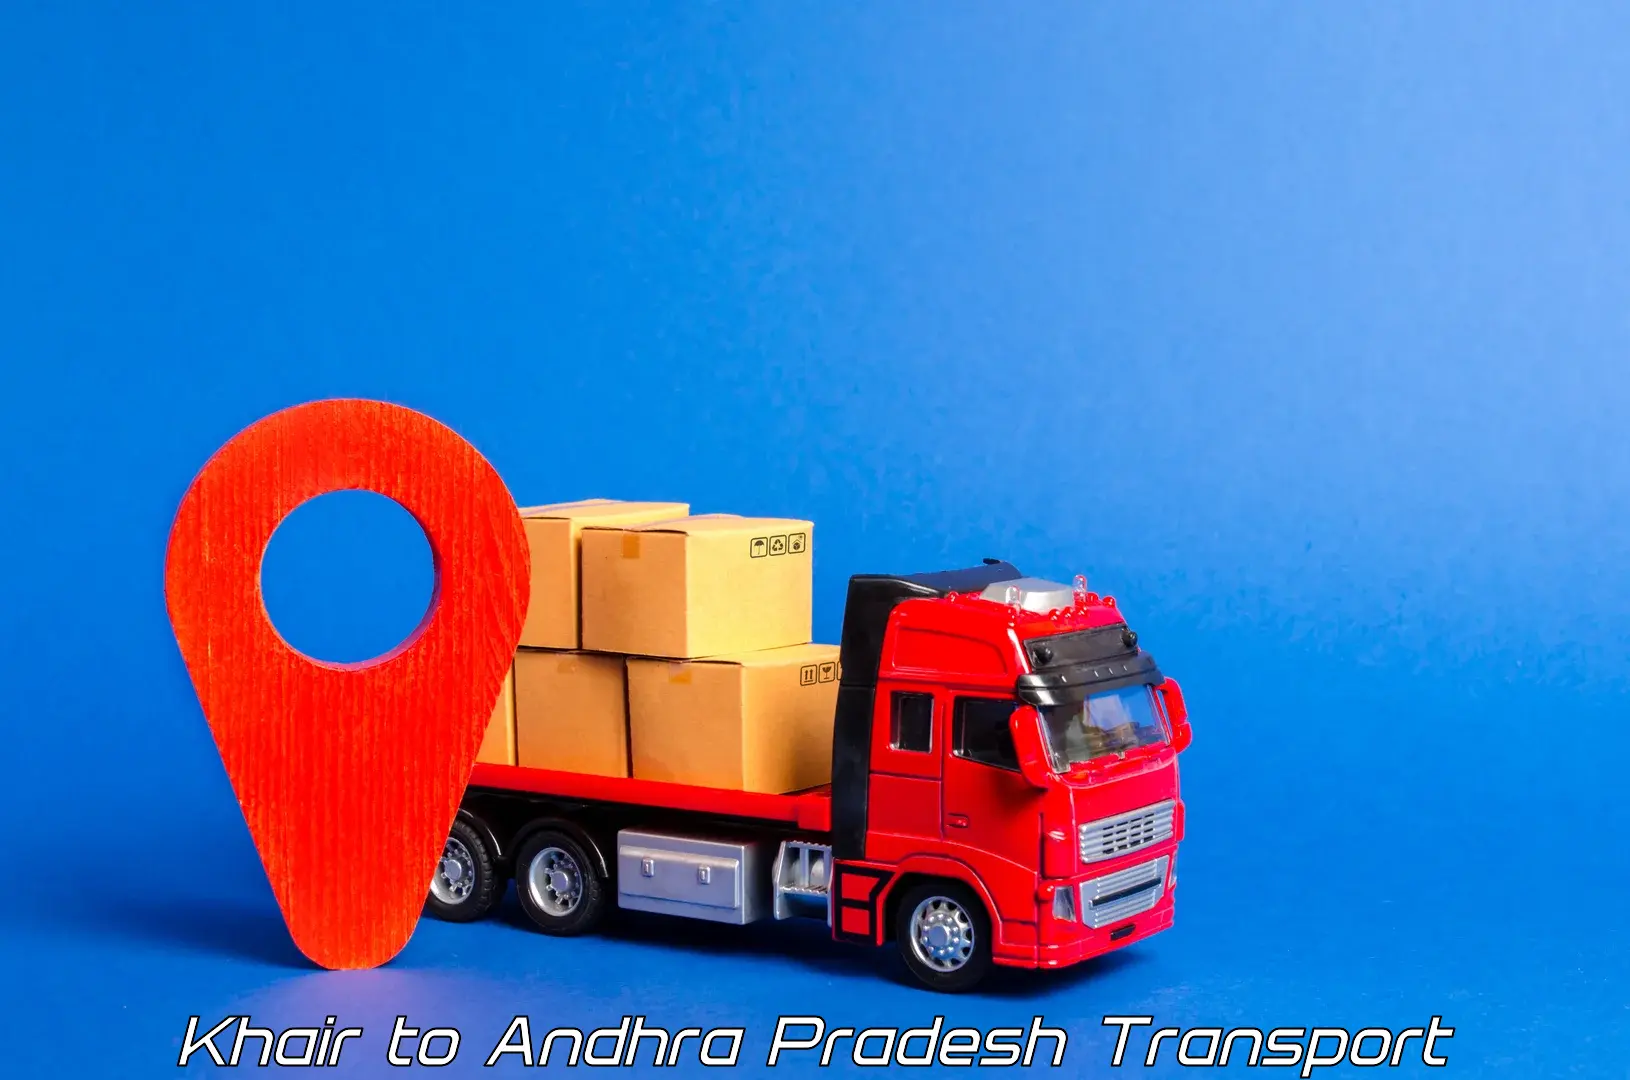 Transport bike from one state to another Khair to IIT Tirupati